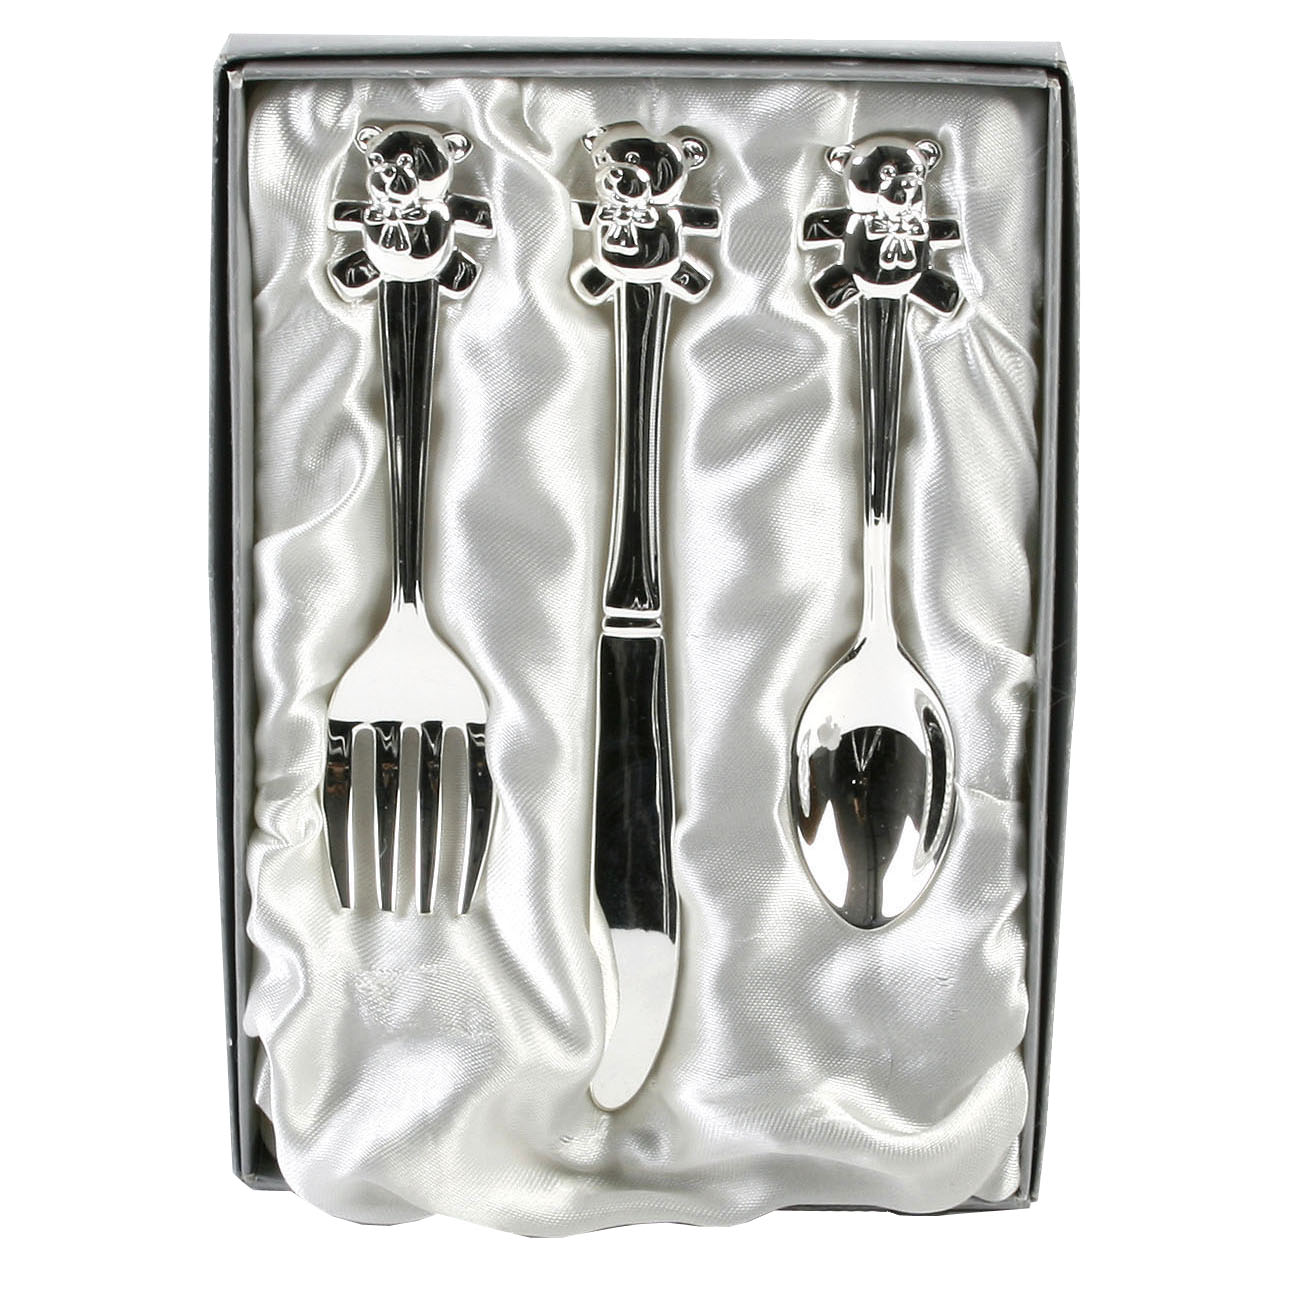 Widdop Gifts Silver Plated Cutlery Set with Teddy Tops